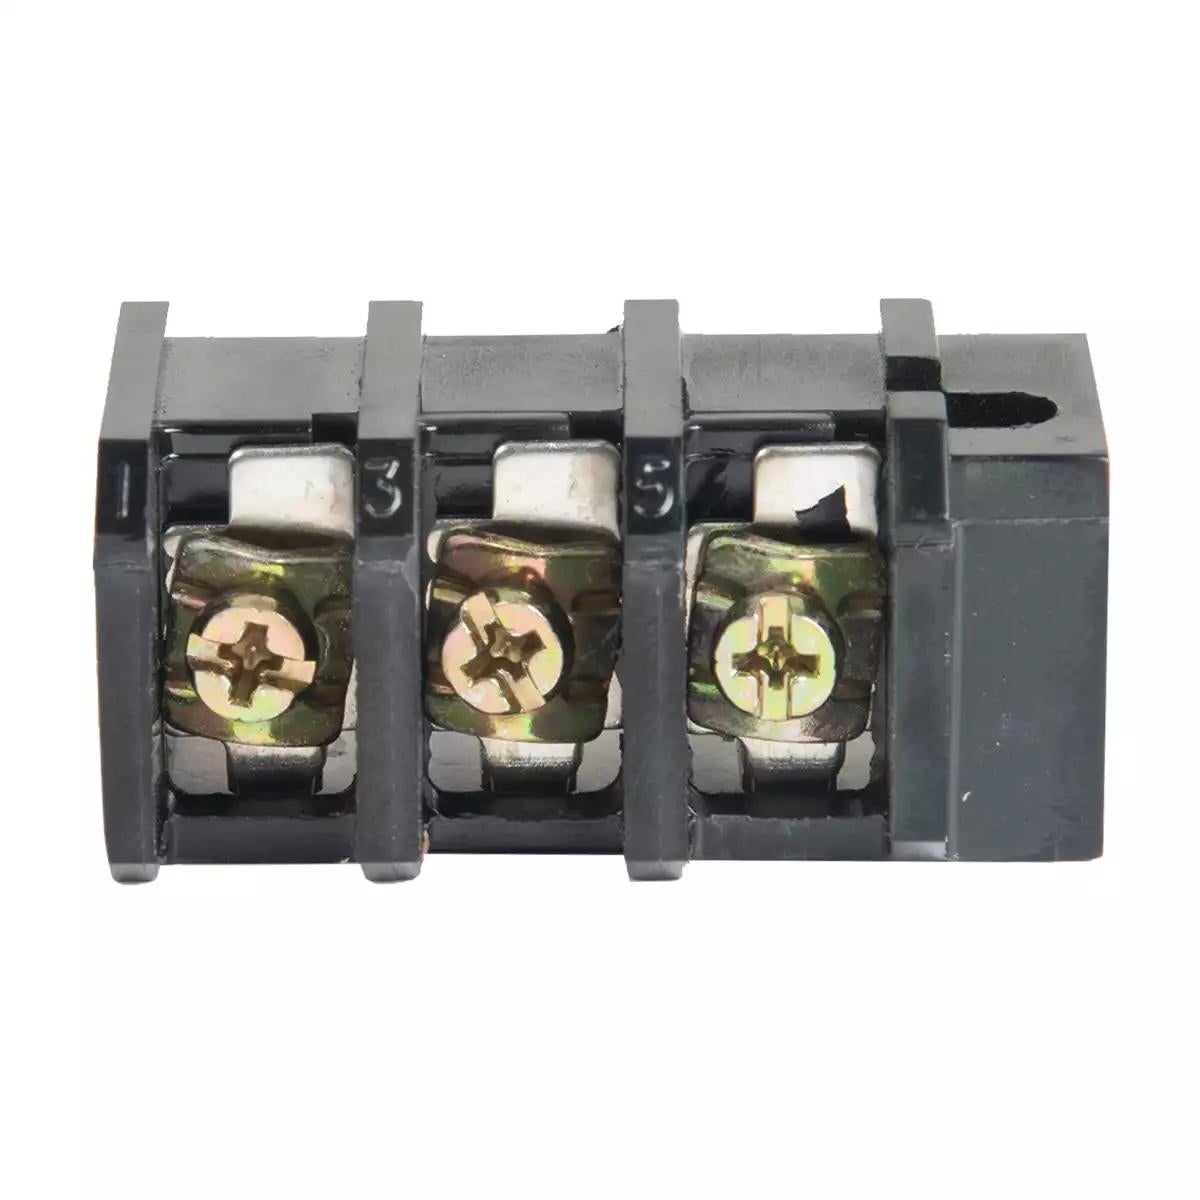 MN 5 Relay Accessory - Kit for Mounting MN 5 Relay on MNX 95/110/140 Contactor